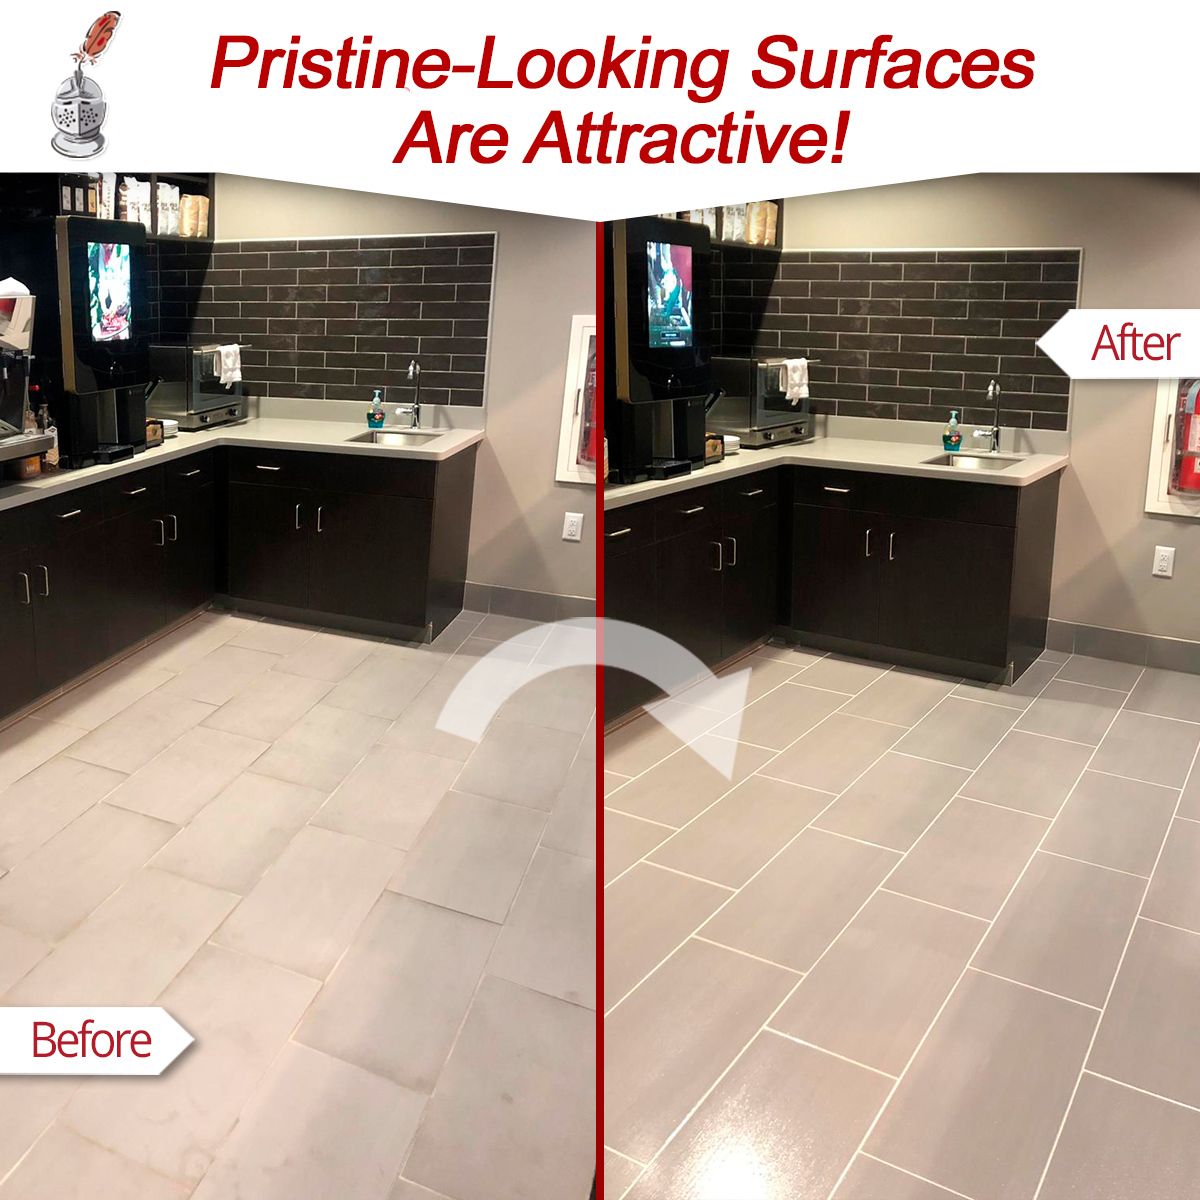 Pristine-Looking Surfaces Are Attractive!